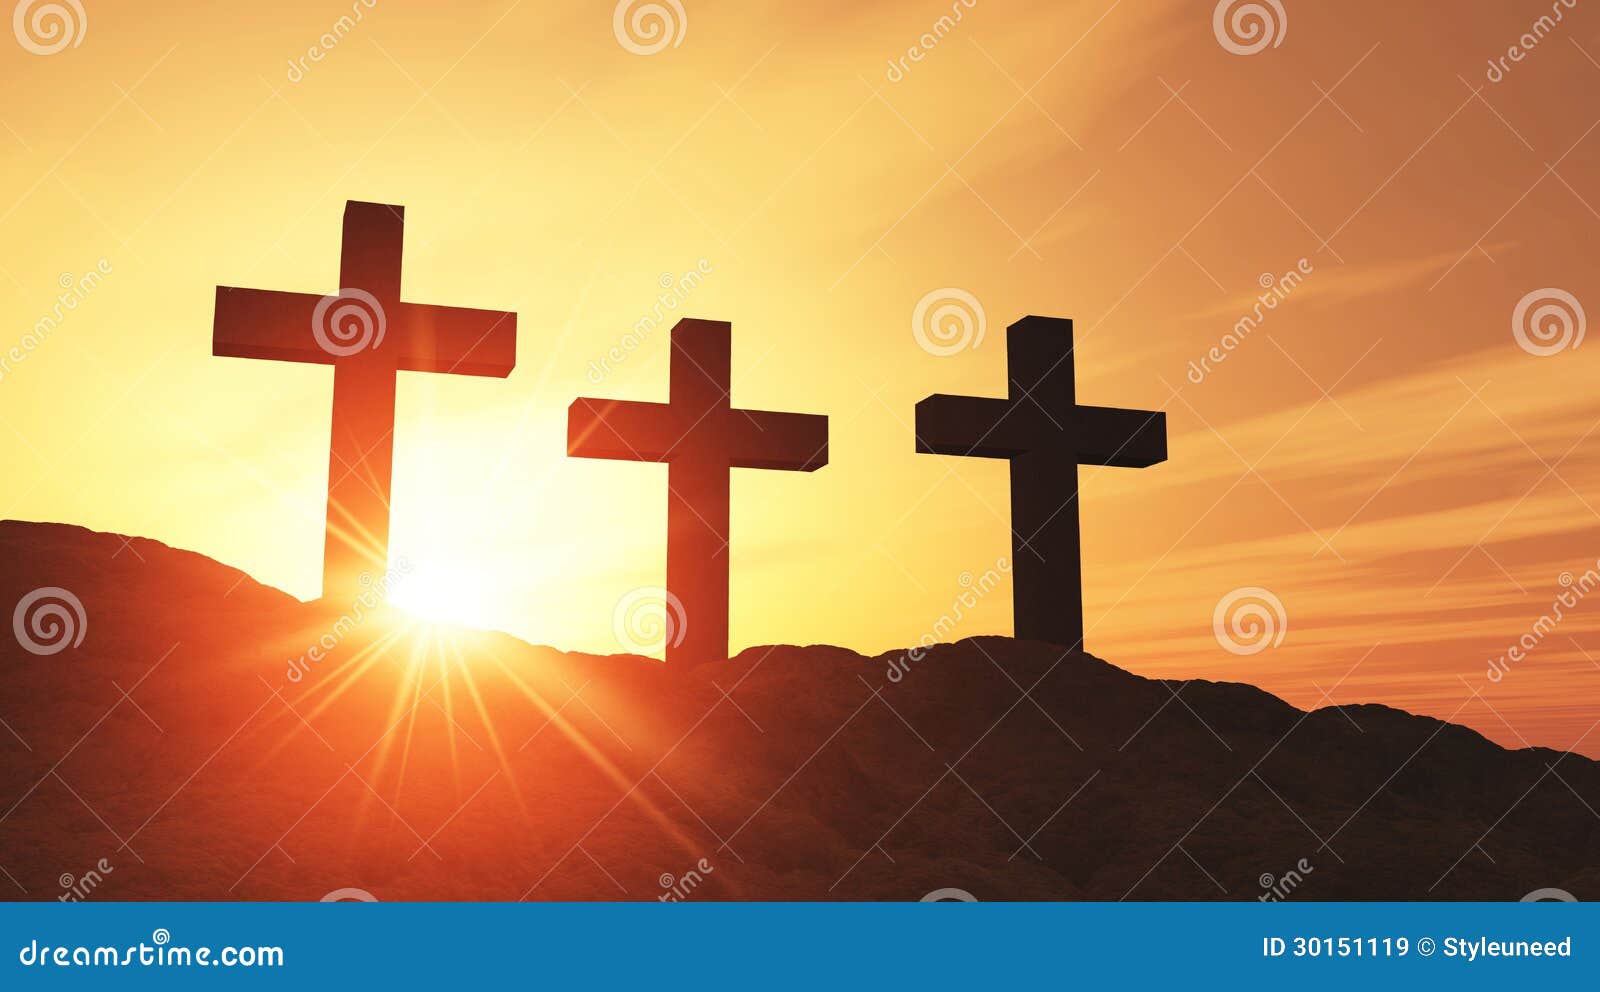 Sunset Over Religious Crosses Stock Image - Image of religion ...